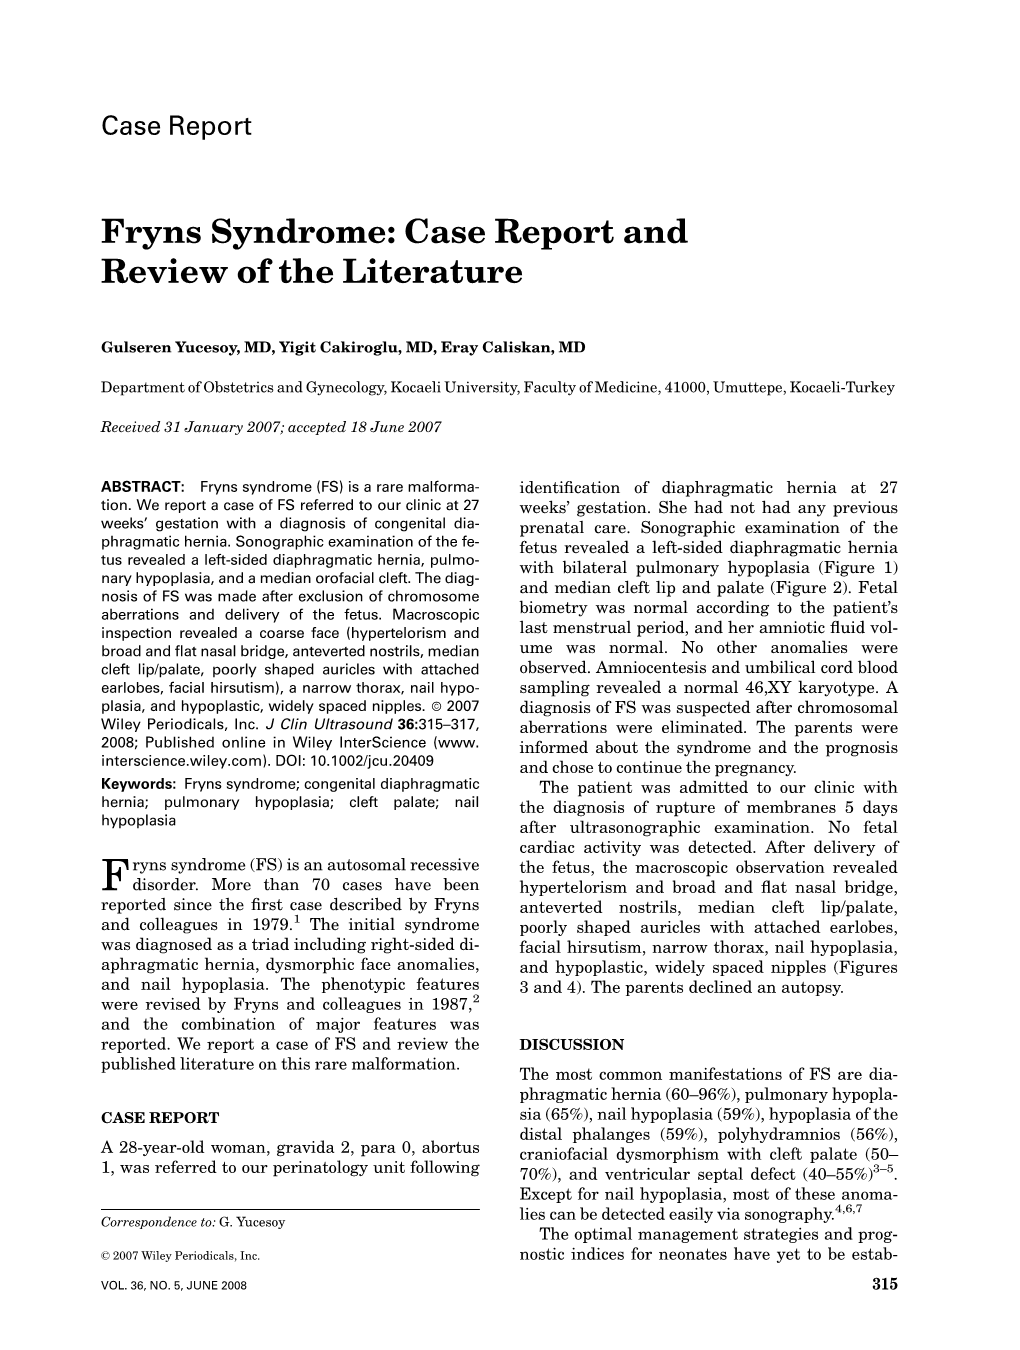 Fryns Syndrome: Case Report and Review of the Literature